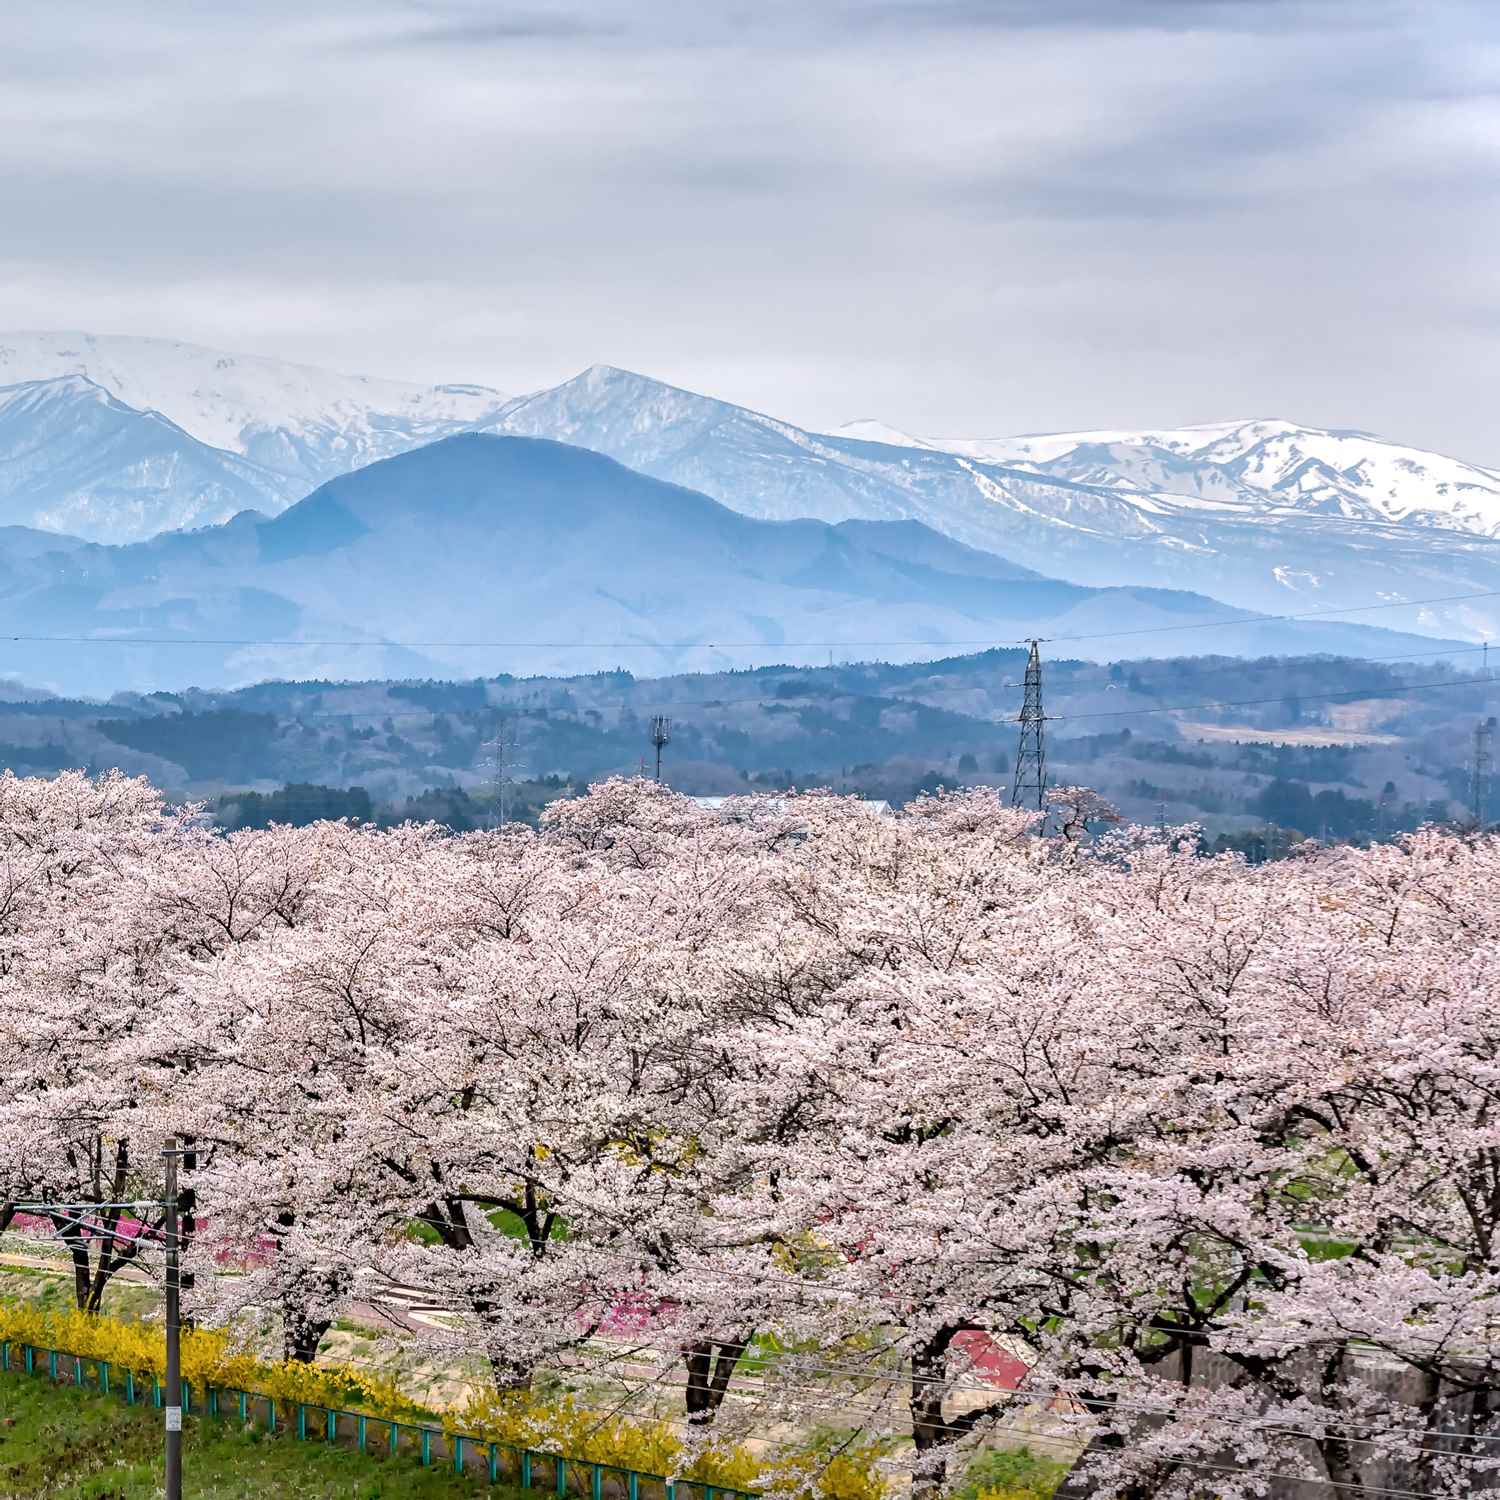 Along the Shiraishi River in Sendai City, 1,200 cherry trees bloom beautifully every year with snow-covered mountains in the background = Shutterstock